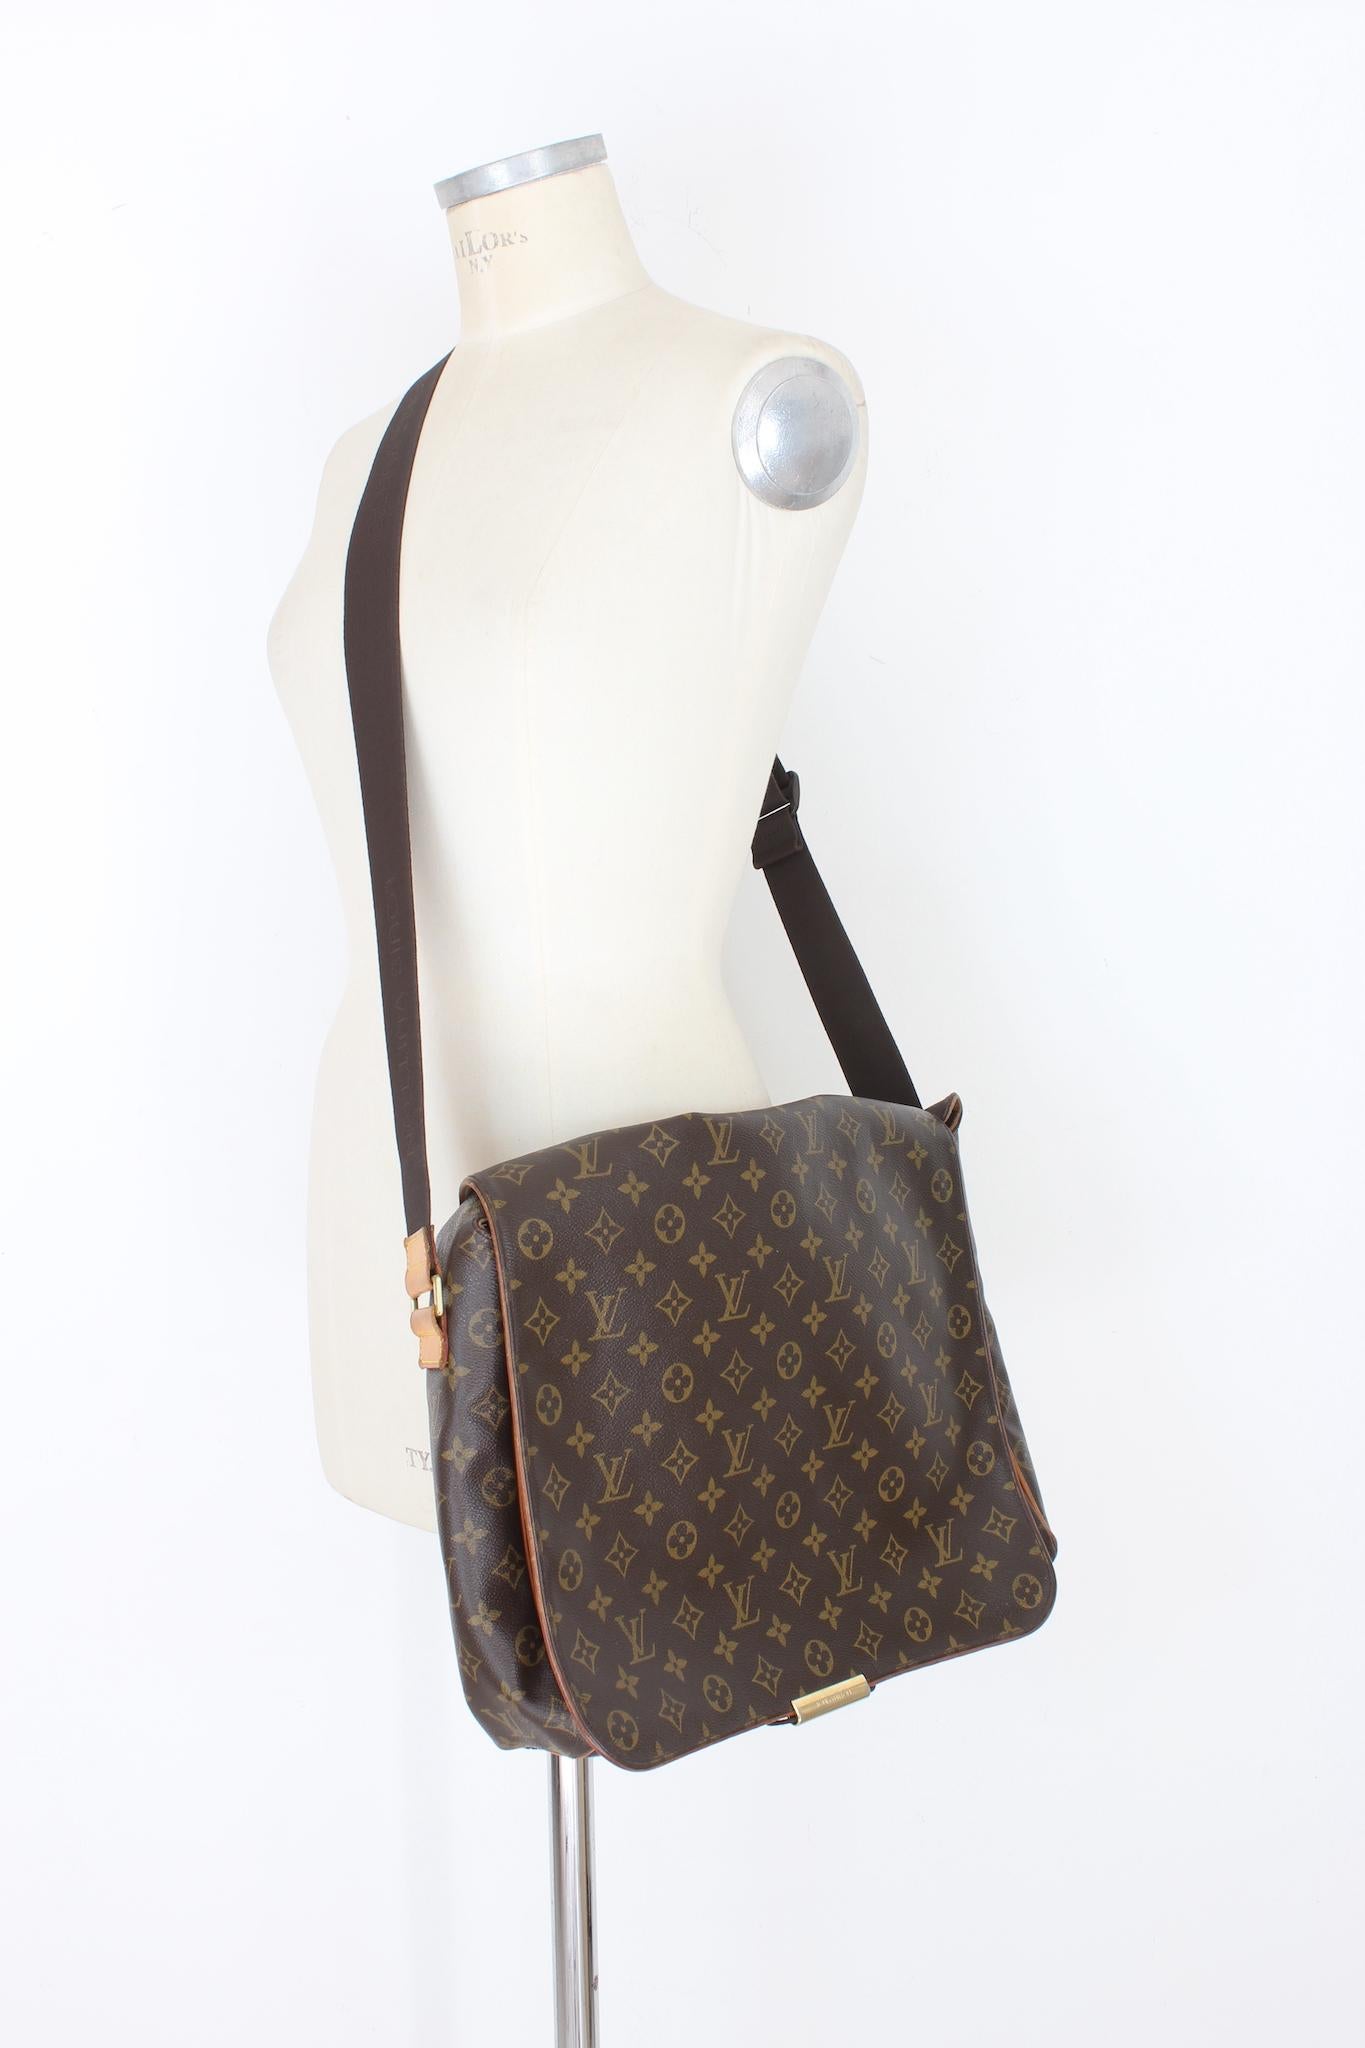 Louis Vuitton Abbesses messenger bag 2000s. Briefcase with adjustable shoulder strap, monogram pattern. Button closure, internal and external pockets for objects. Made in Spain. The general condition of the bag is excellent, with slight signs of